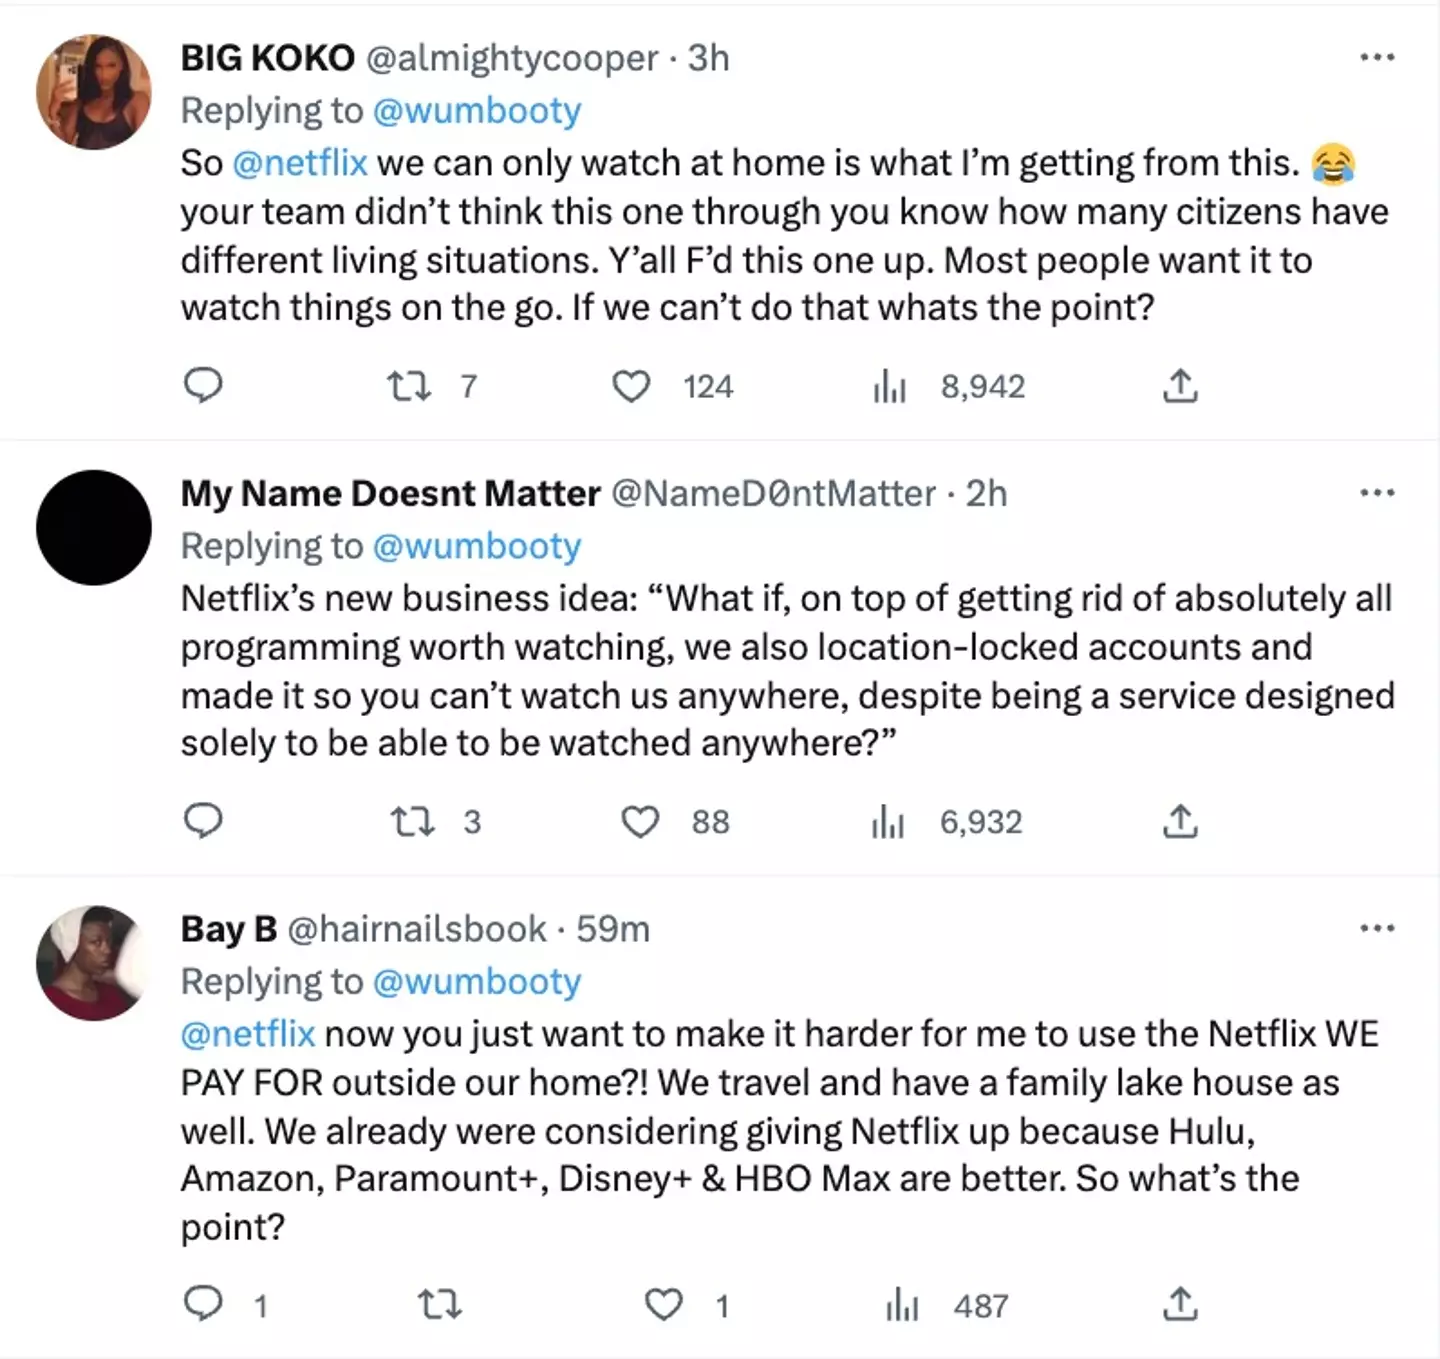 Netflix is facing backlash over the decision.